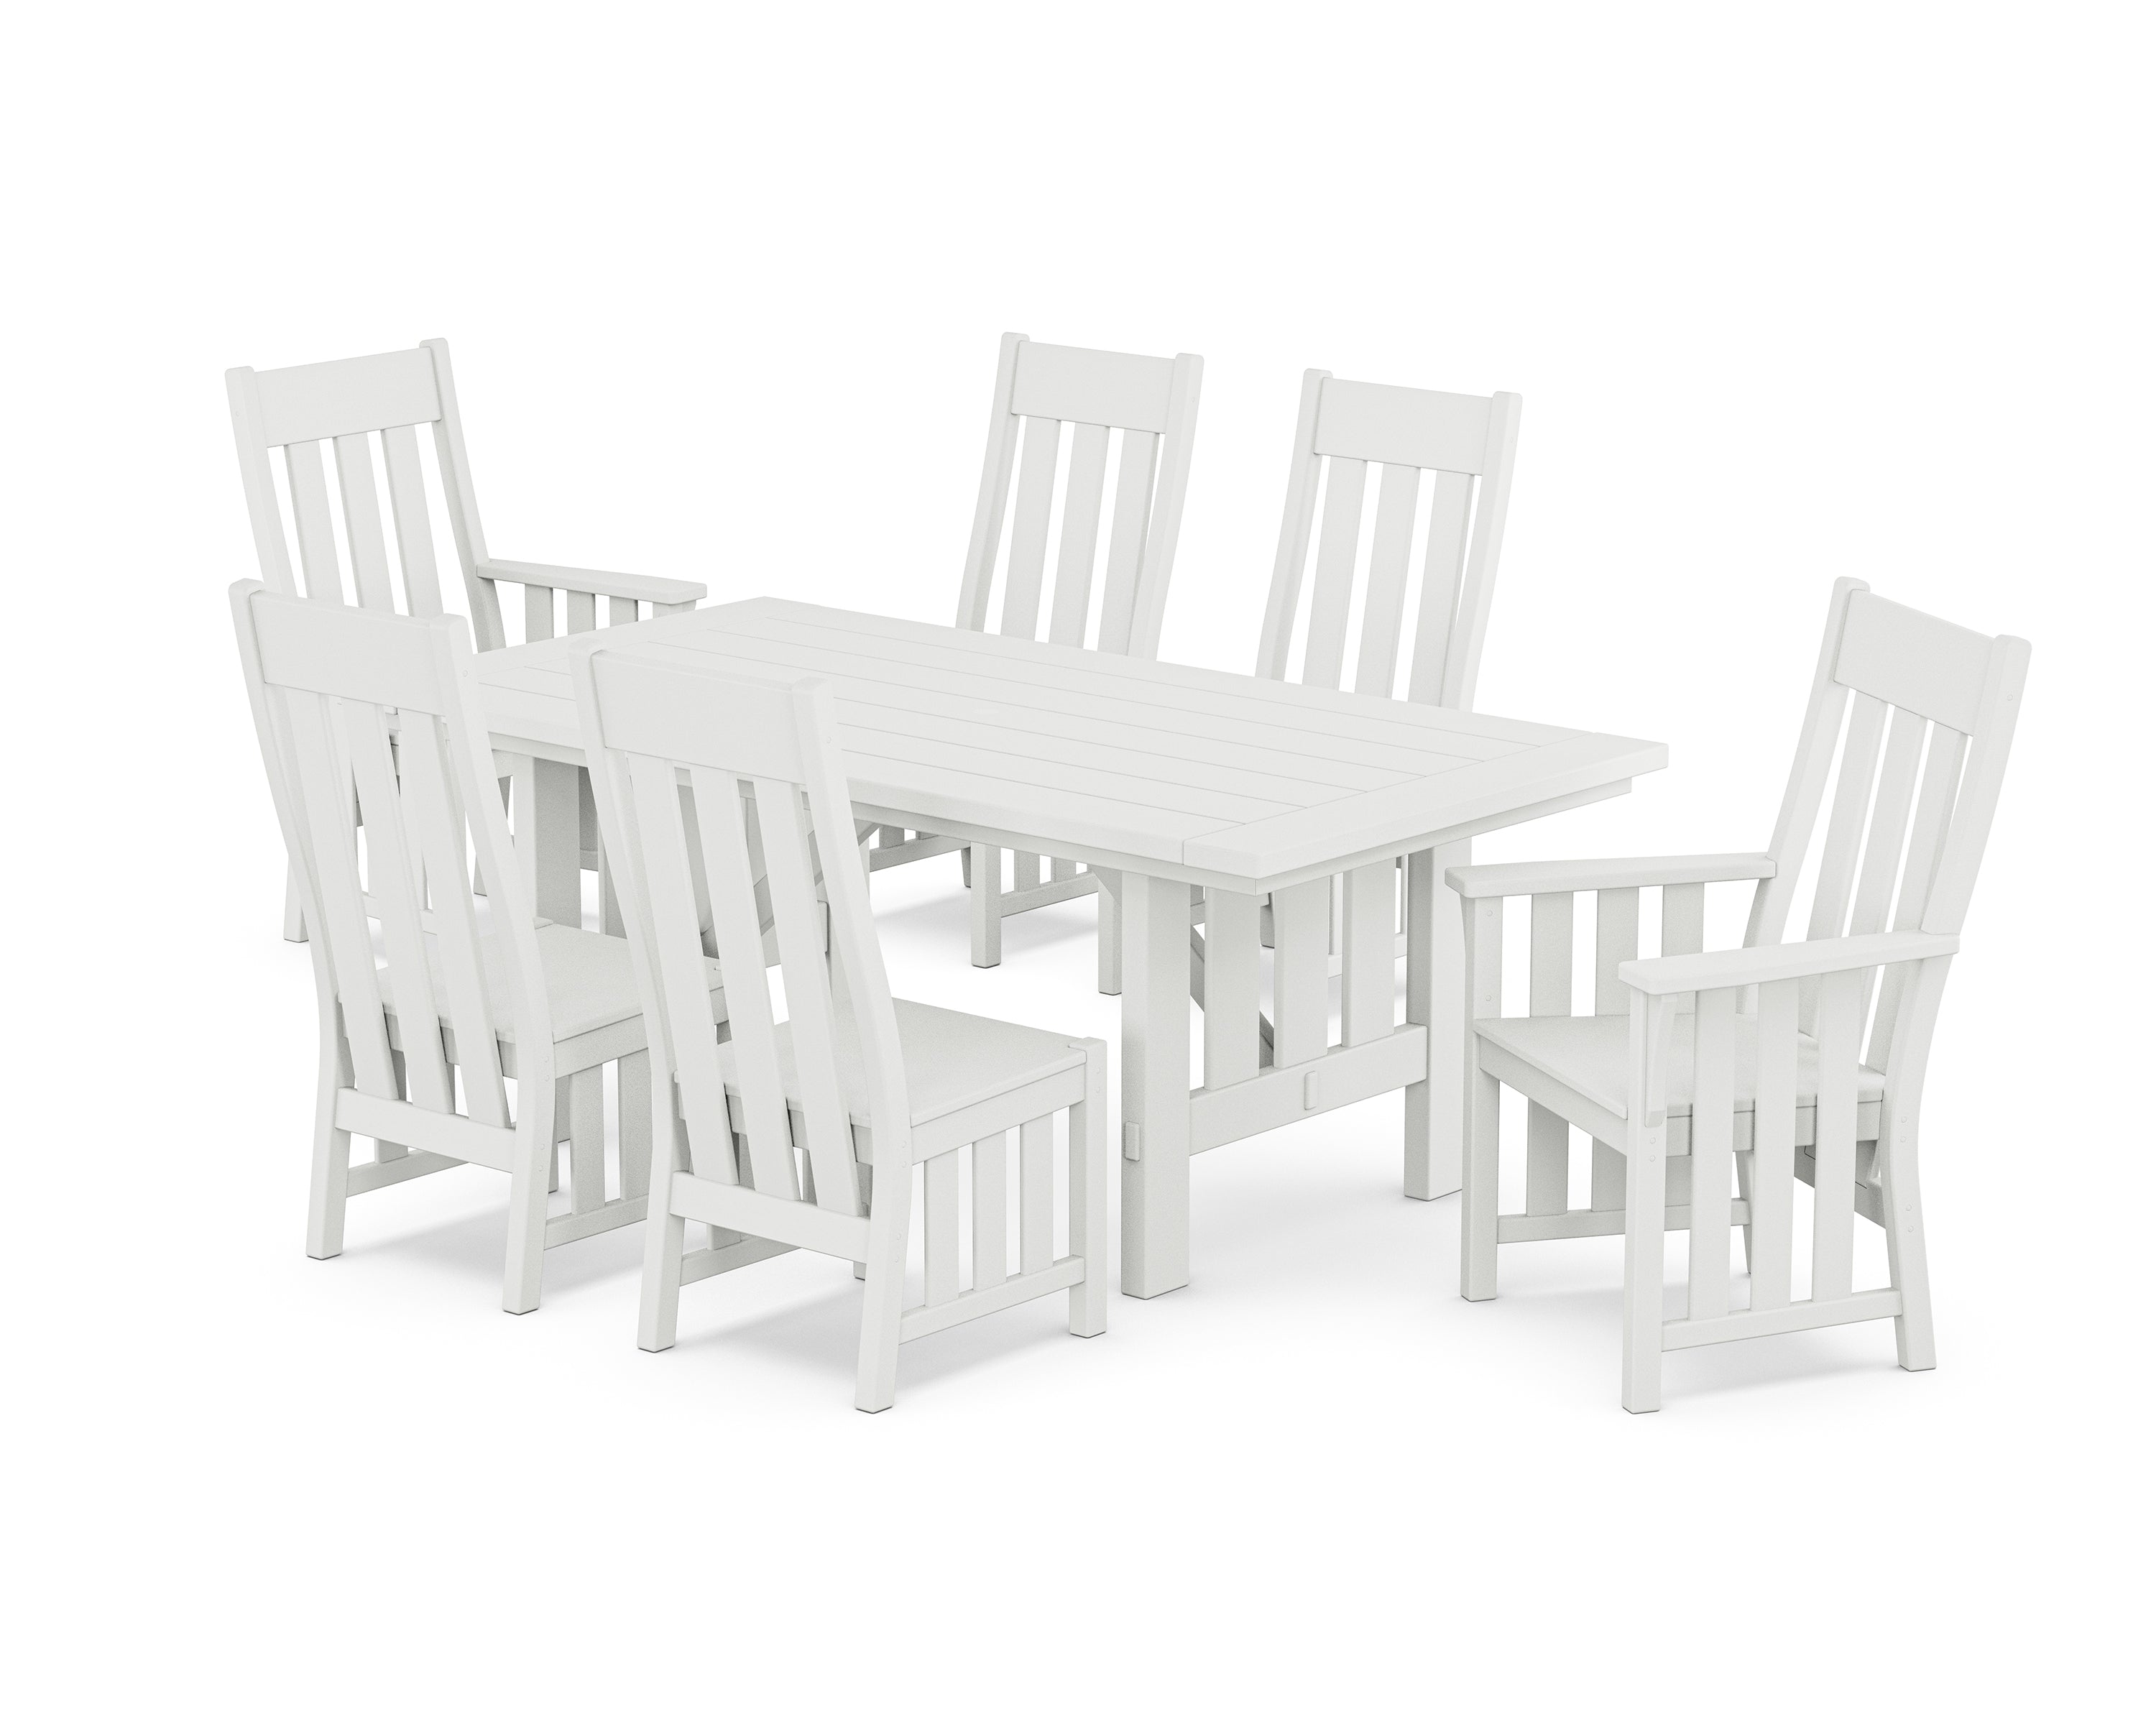 Martha Stewart by POLYWOOD® Acadia 7-Piece Dining Set in White